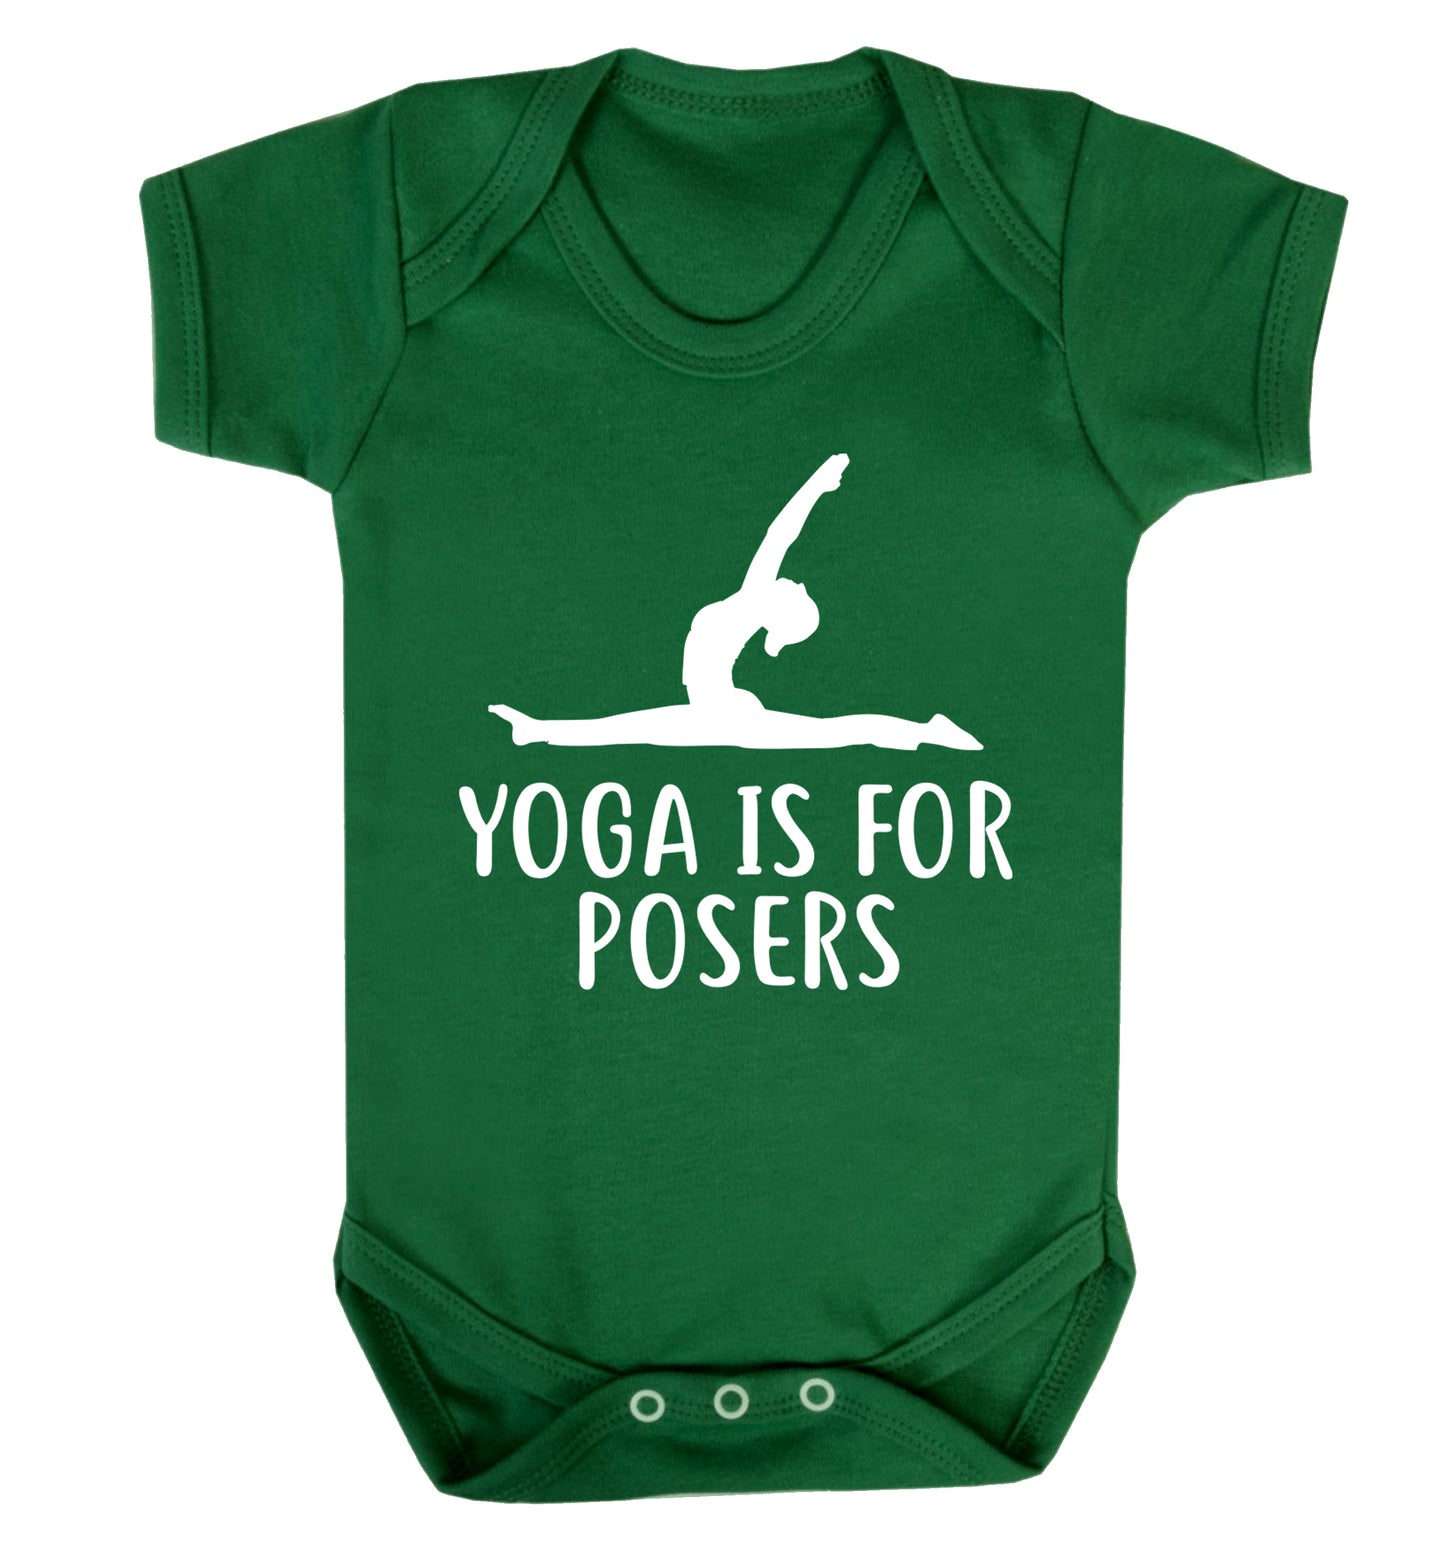 Yoga is for posers Baby Vest green 18-24 months